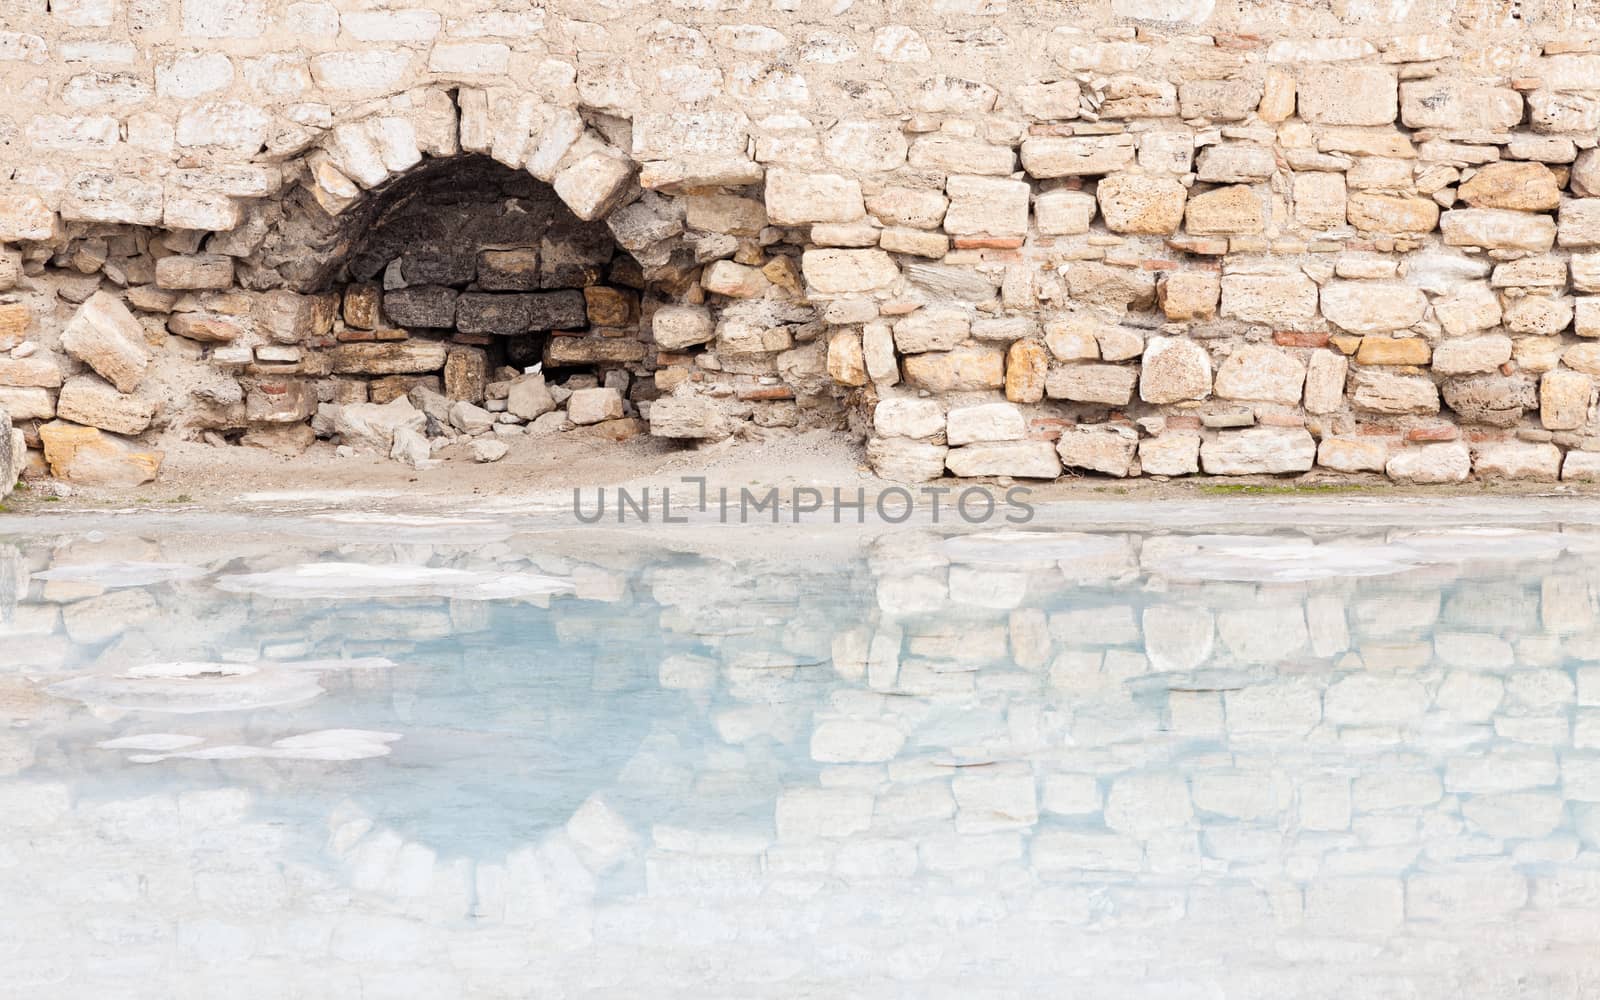 The view across a hot spring towards a ruined building in Hierapolis, southwestern Turkey.  The site is a UNESCO World Heritage Site.